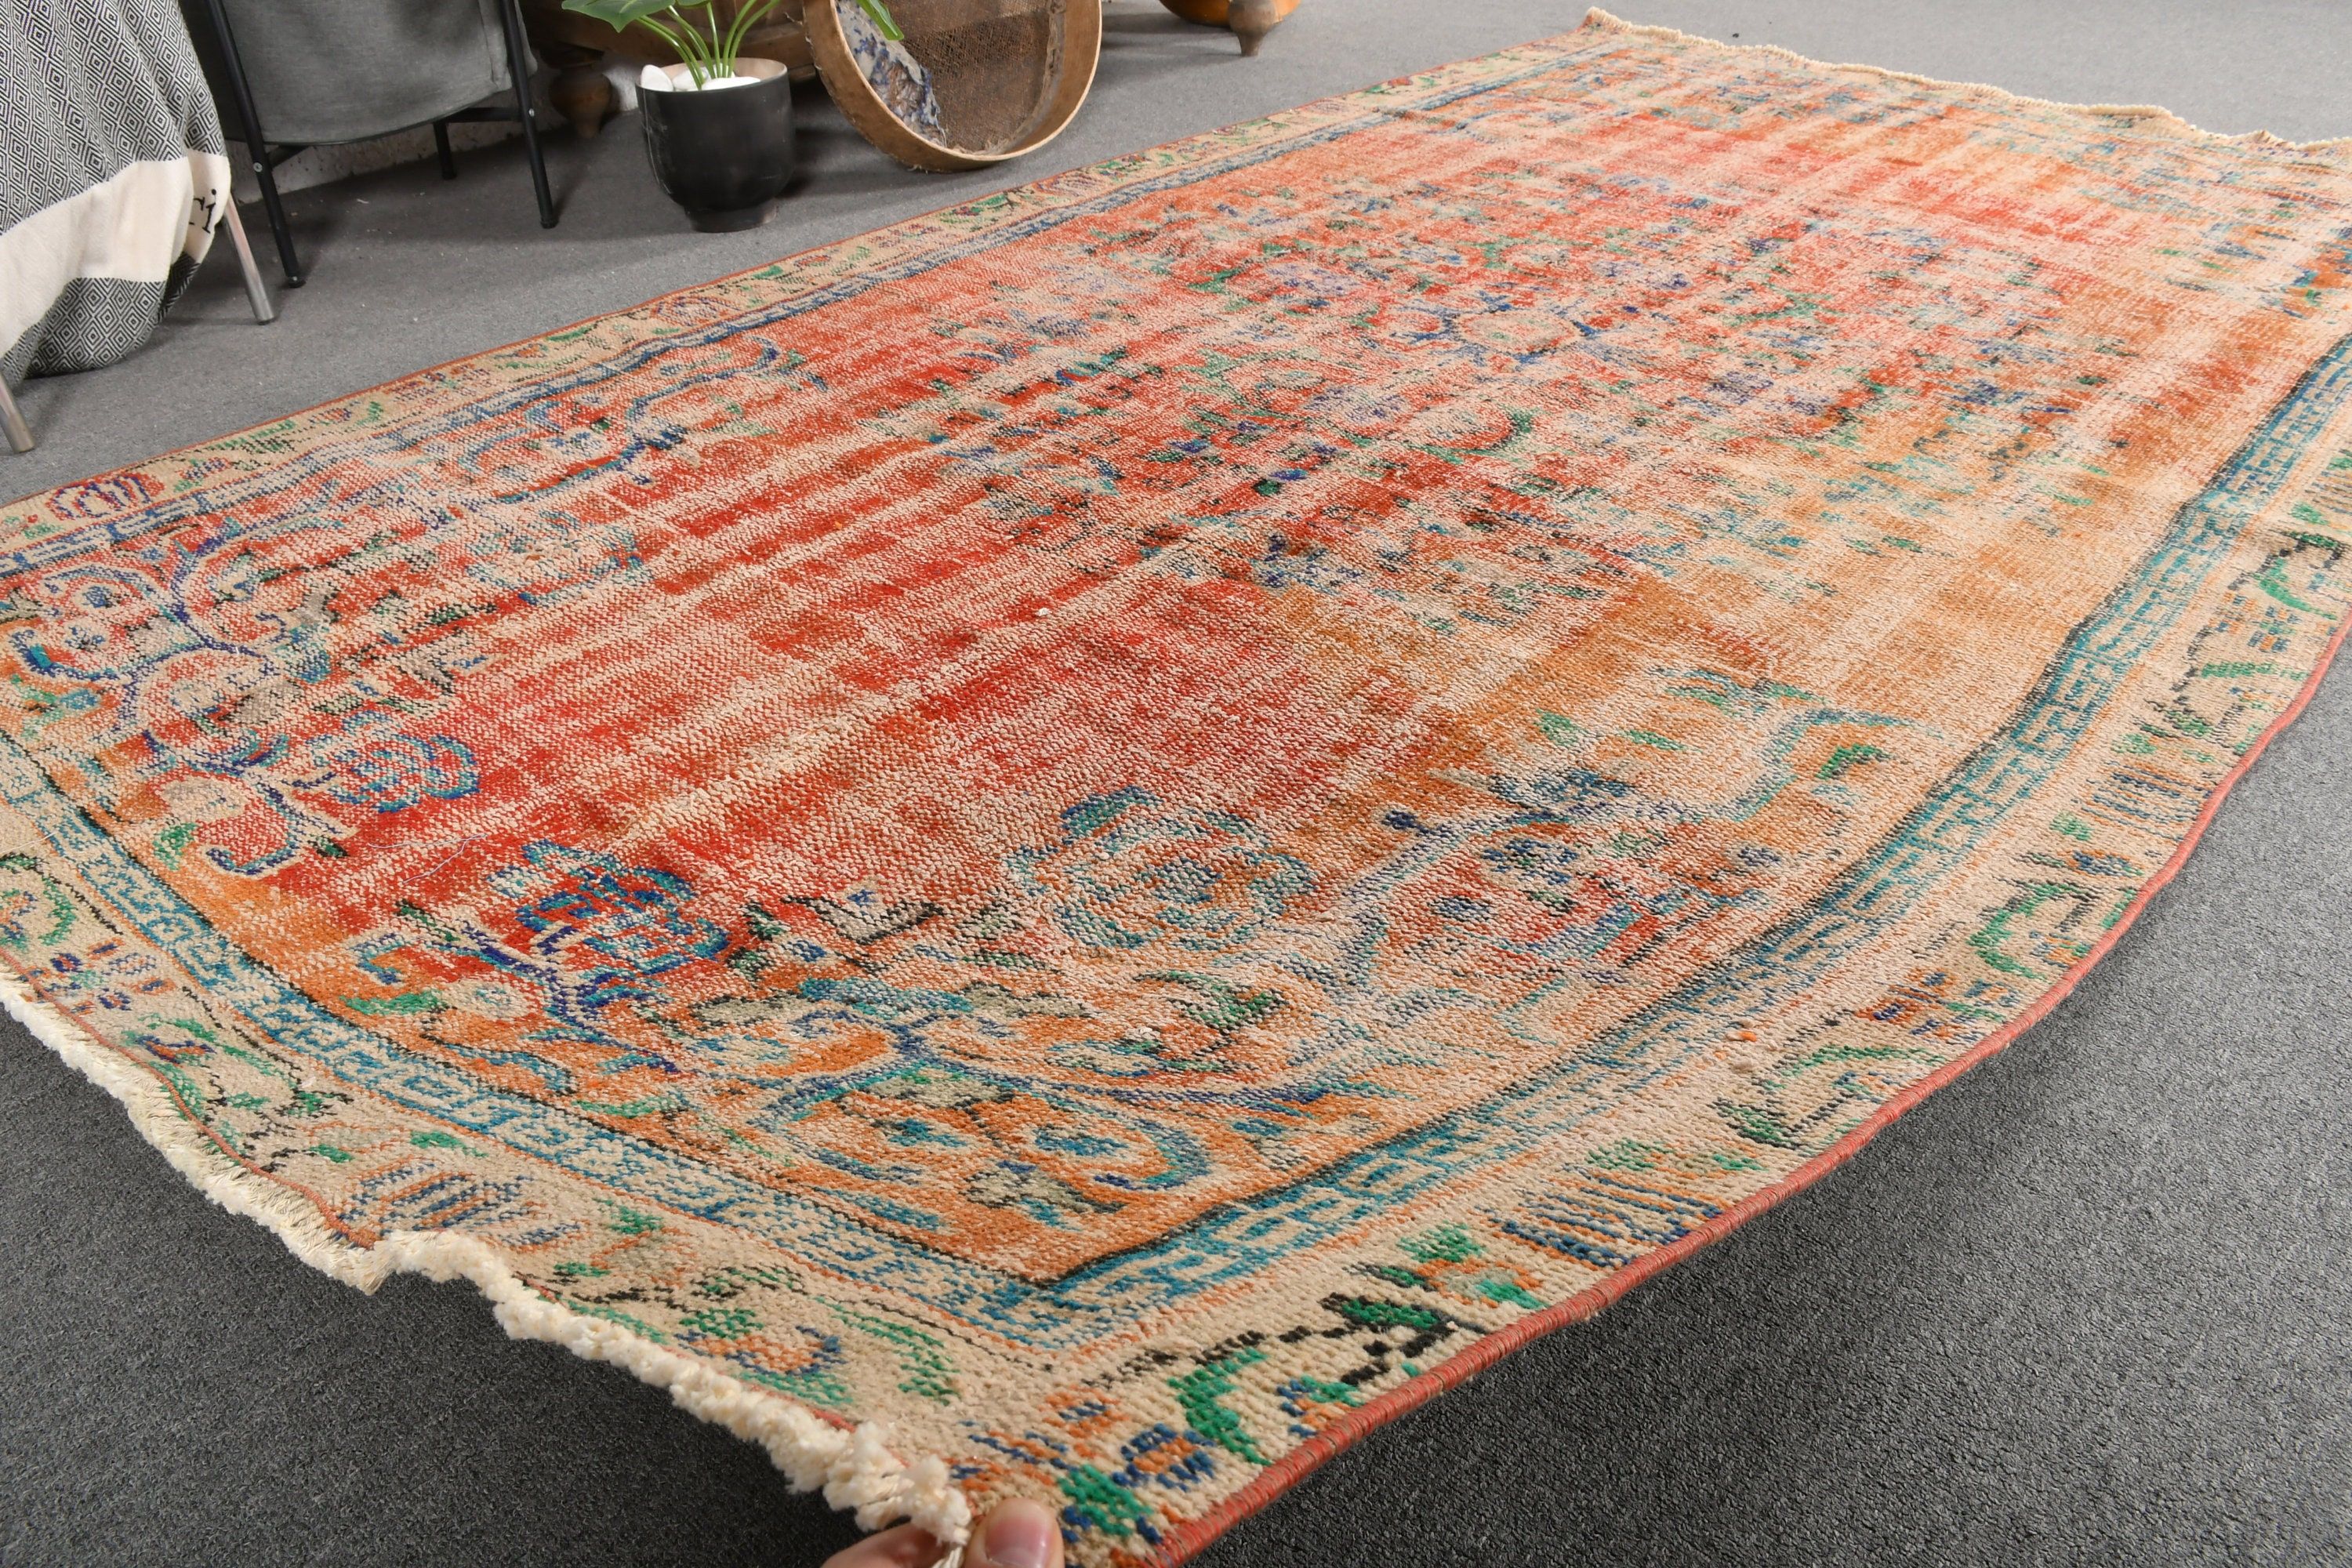 Vintage Rugs, Red  4.9x8.8 ft Large Rug, Cool Rugs, Turkish Rugs, Salon Rugs, Dining Room Rug, Antique Rug, Rugs for Salon